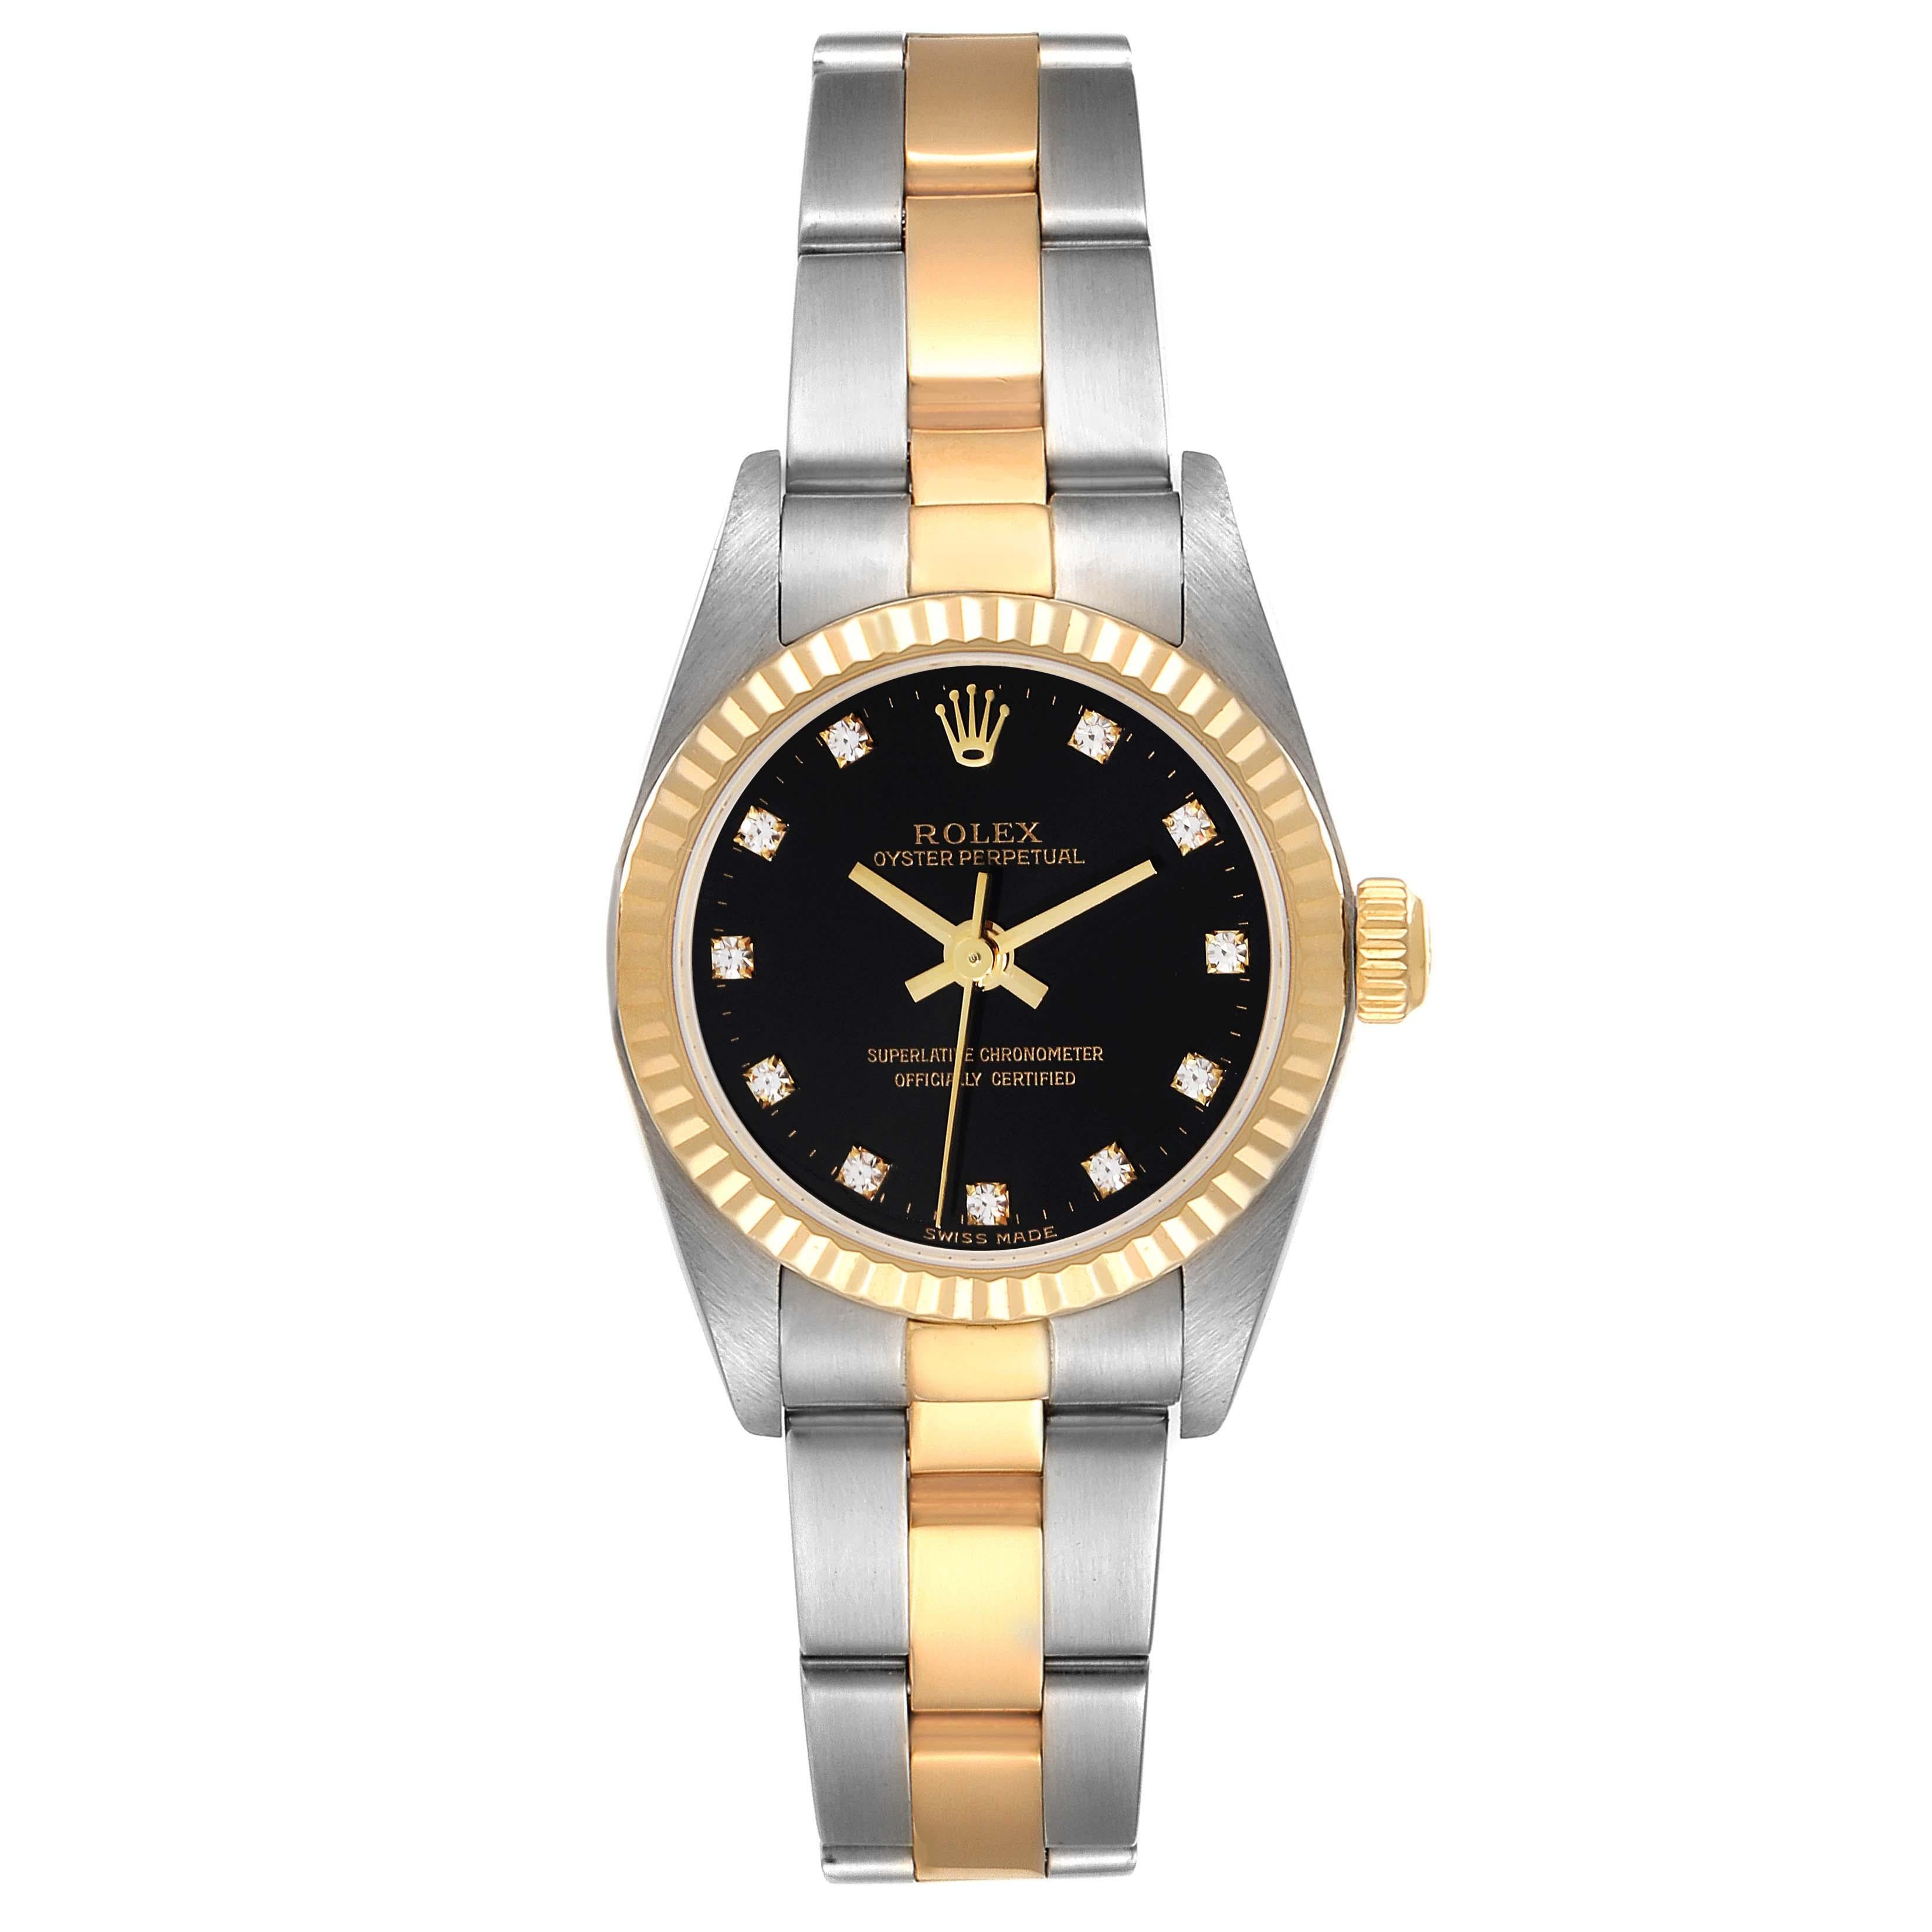 Rolex Oyster Perpetual Steel Yellow Gold Diamond Ladies Watch 76193. Officially certified chronometer self-winding movement. Stainless steel oyster case 24.0 mm in diameter. Rolex logo on a 18k yellow gold crown. 18k yellow gold fluted bezel.